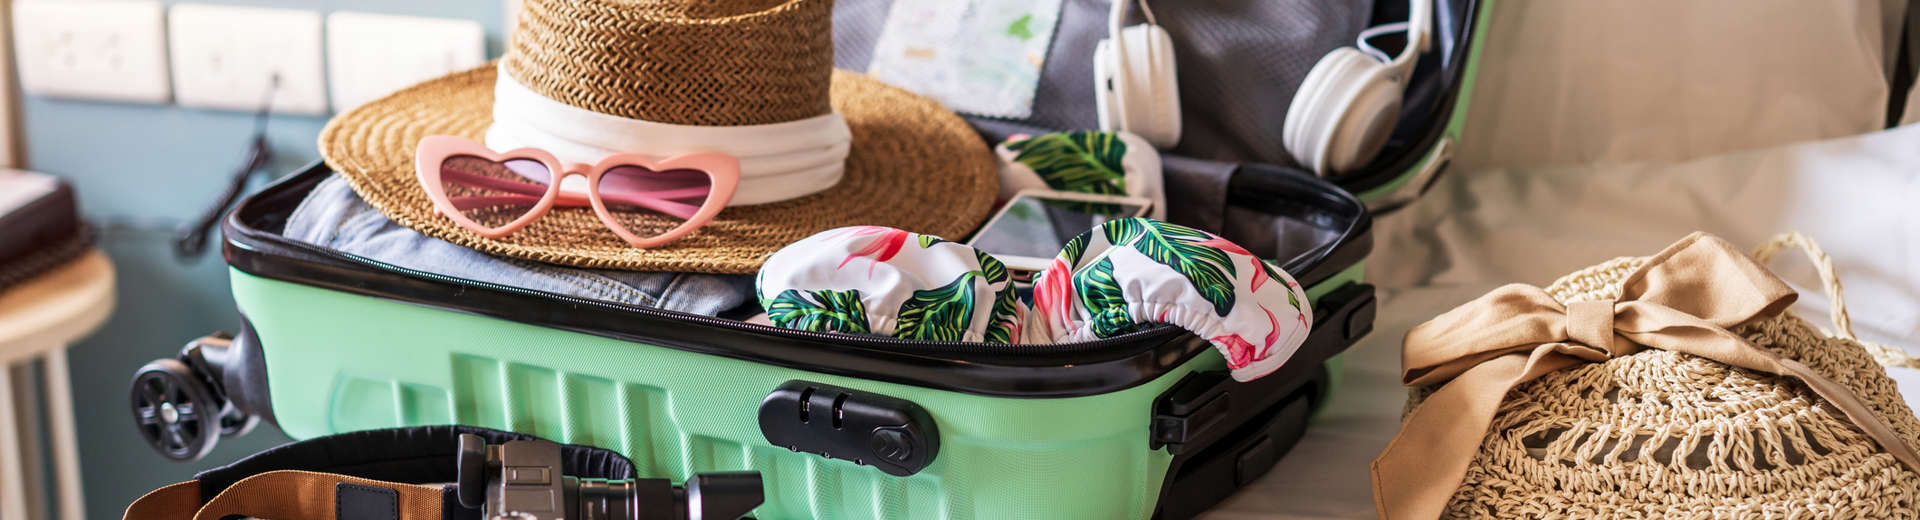 25 Smart Accessories That'll Make Travel Easier